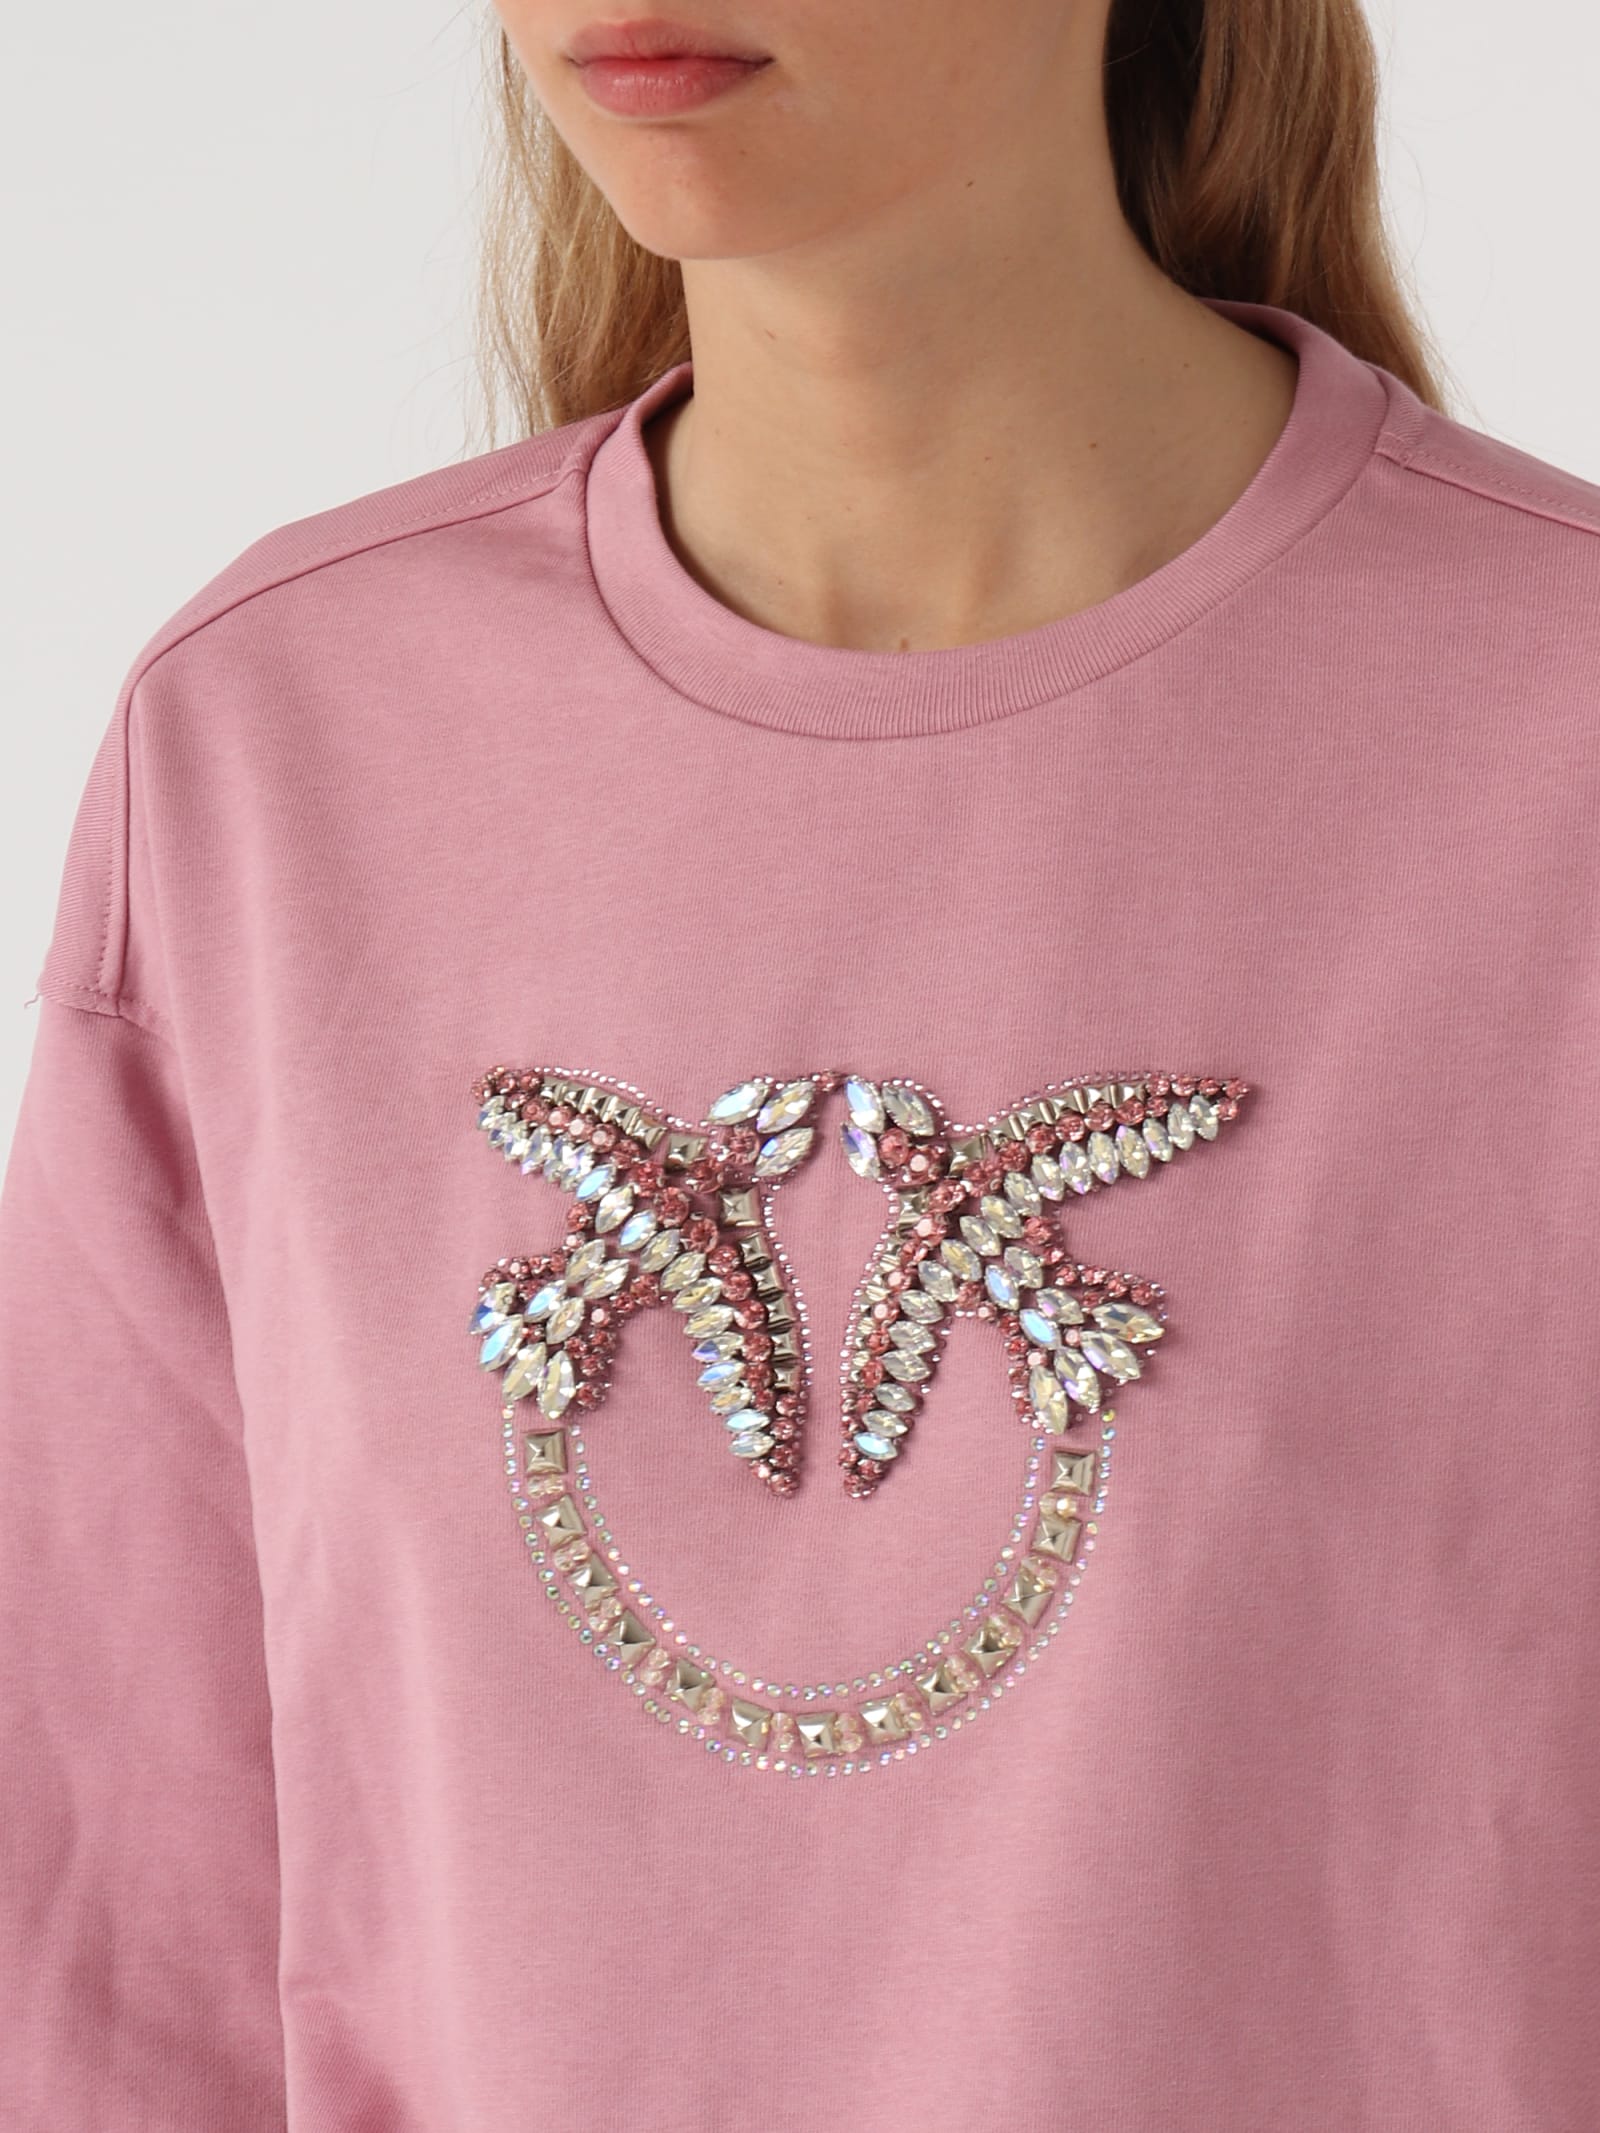 Shop Pinko Nelly Hoodie In Rosa